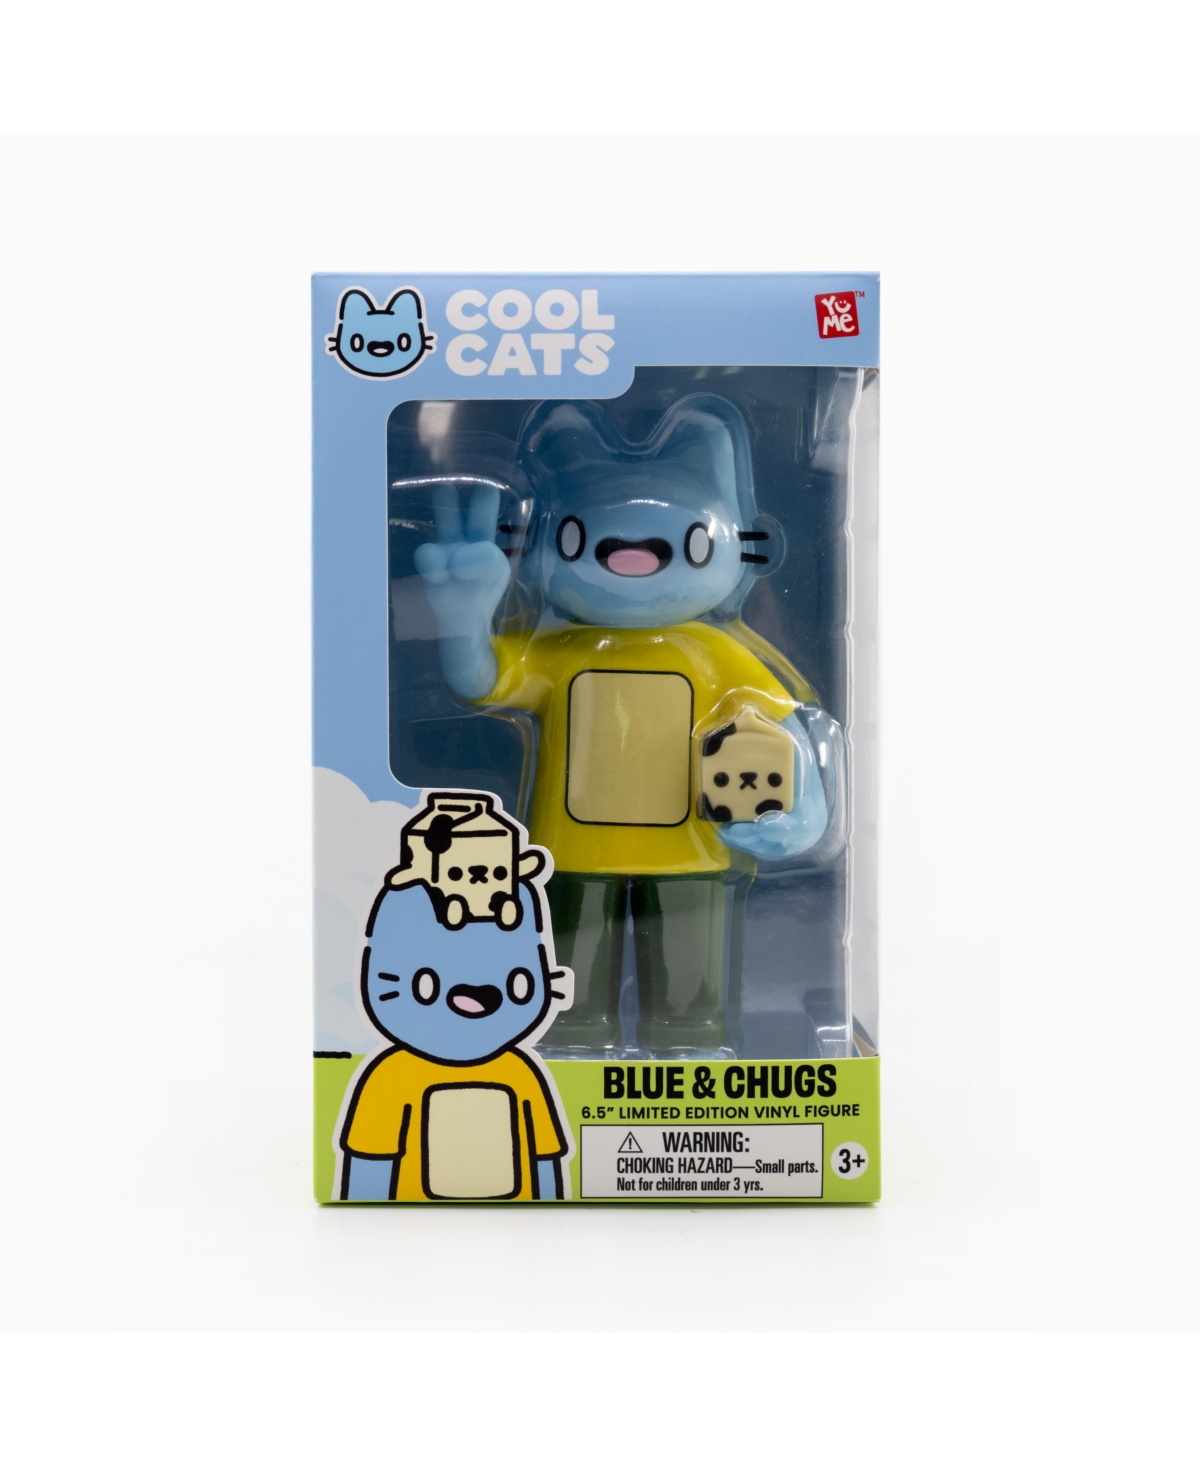 Macy's Thanksgiving Day Parade Edition 6.5" Blue Cat And Chugs Vinyl Figure In Cool Cat Blue